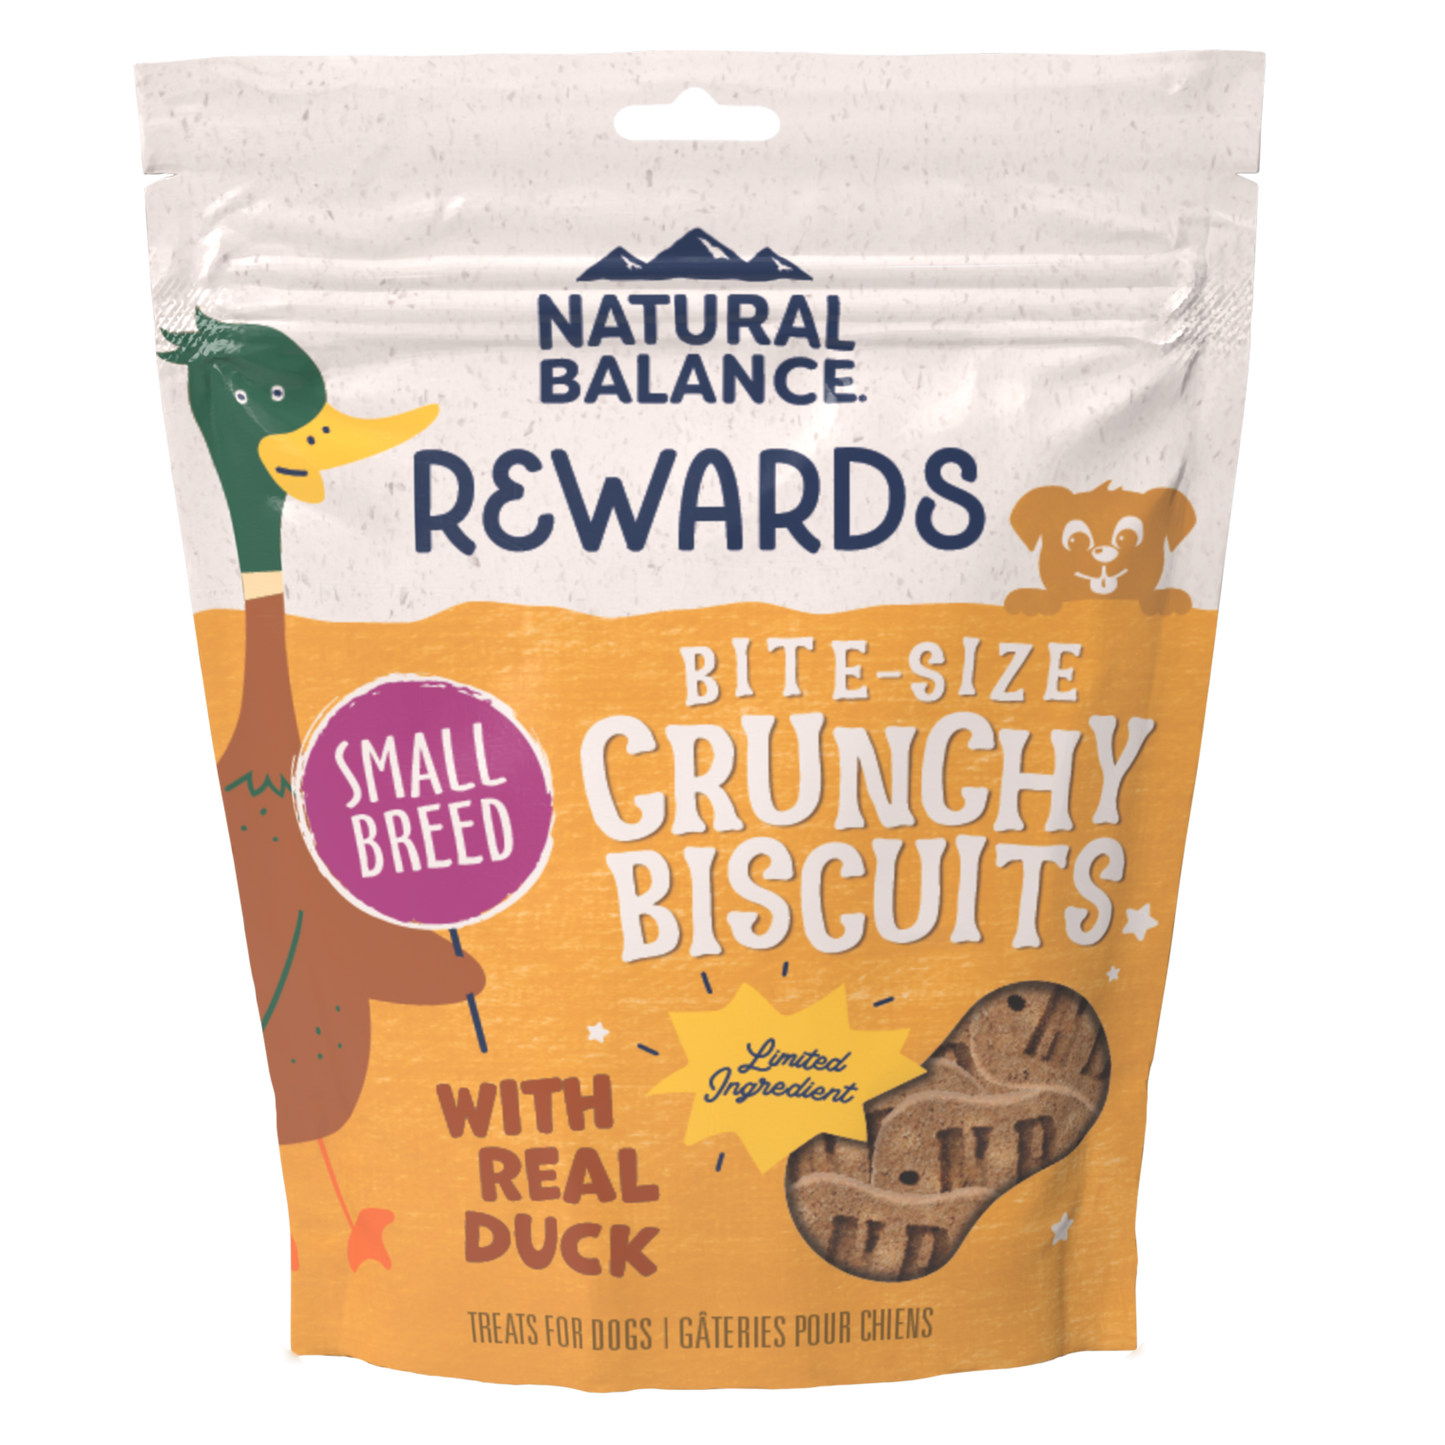 Natural Balance Limited Ingredient Crunchy Biscuits Small Breed Potato And Duck Recipe Dog Treat, 8-oz Bag